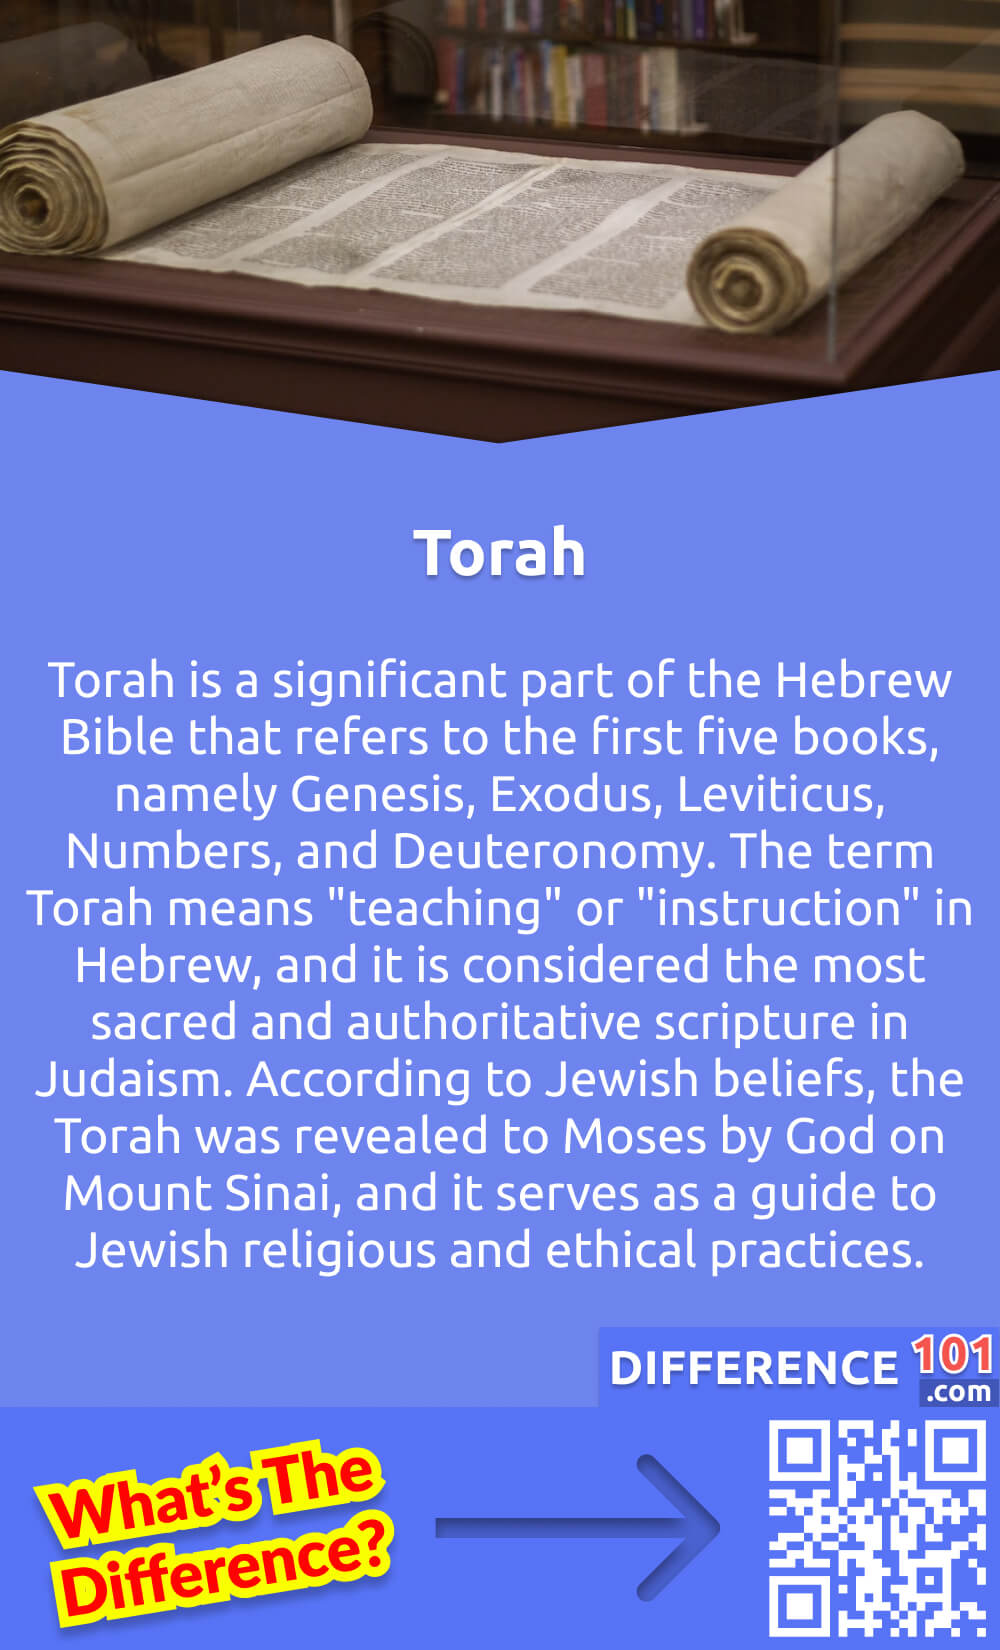 What Is Torah? Torah is a significant part of the Hebrew Bible that refers to the first five books, namely Genesis, Exodus, Leviticus, Numbers, and Deuteronomy. The term Torah means "teaching" or "instruction" in Hebrew, and it is considered the most sacred and authoritative scripture in Judaism. According to Jewish beliefs, the Torah was revealed to Moses by God on Mount Sinai, and it serves as a guide to Jewish religious and ethical practices. The Torah contains various laws, commandments, and stories that depict the relationship between God and the Israelites. It is an essential component of Jewish faith and culture, and its teachings are still relevant and significant in modern times.